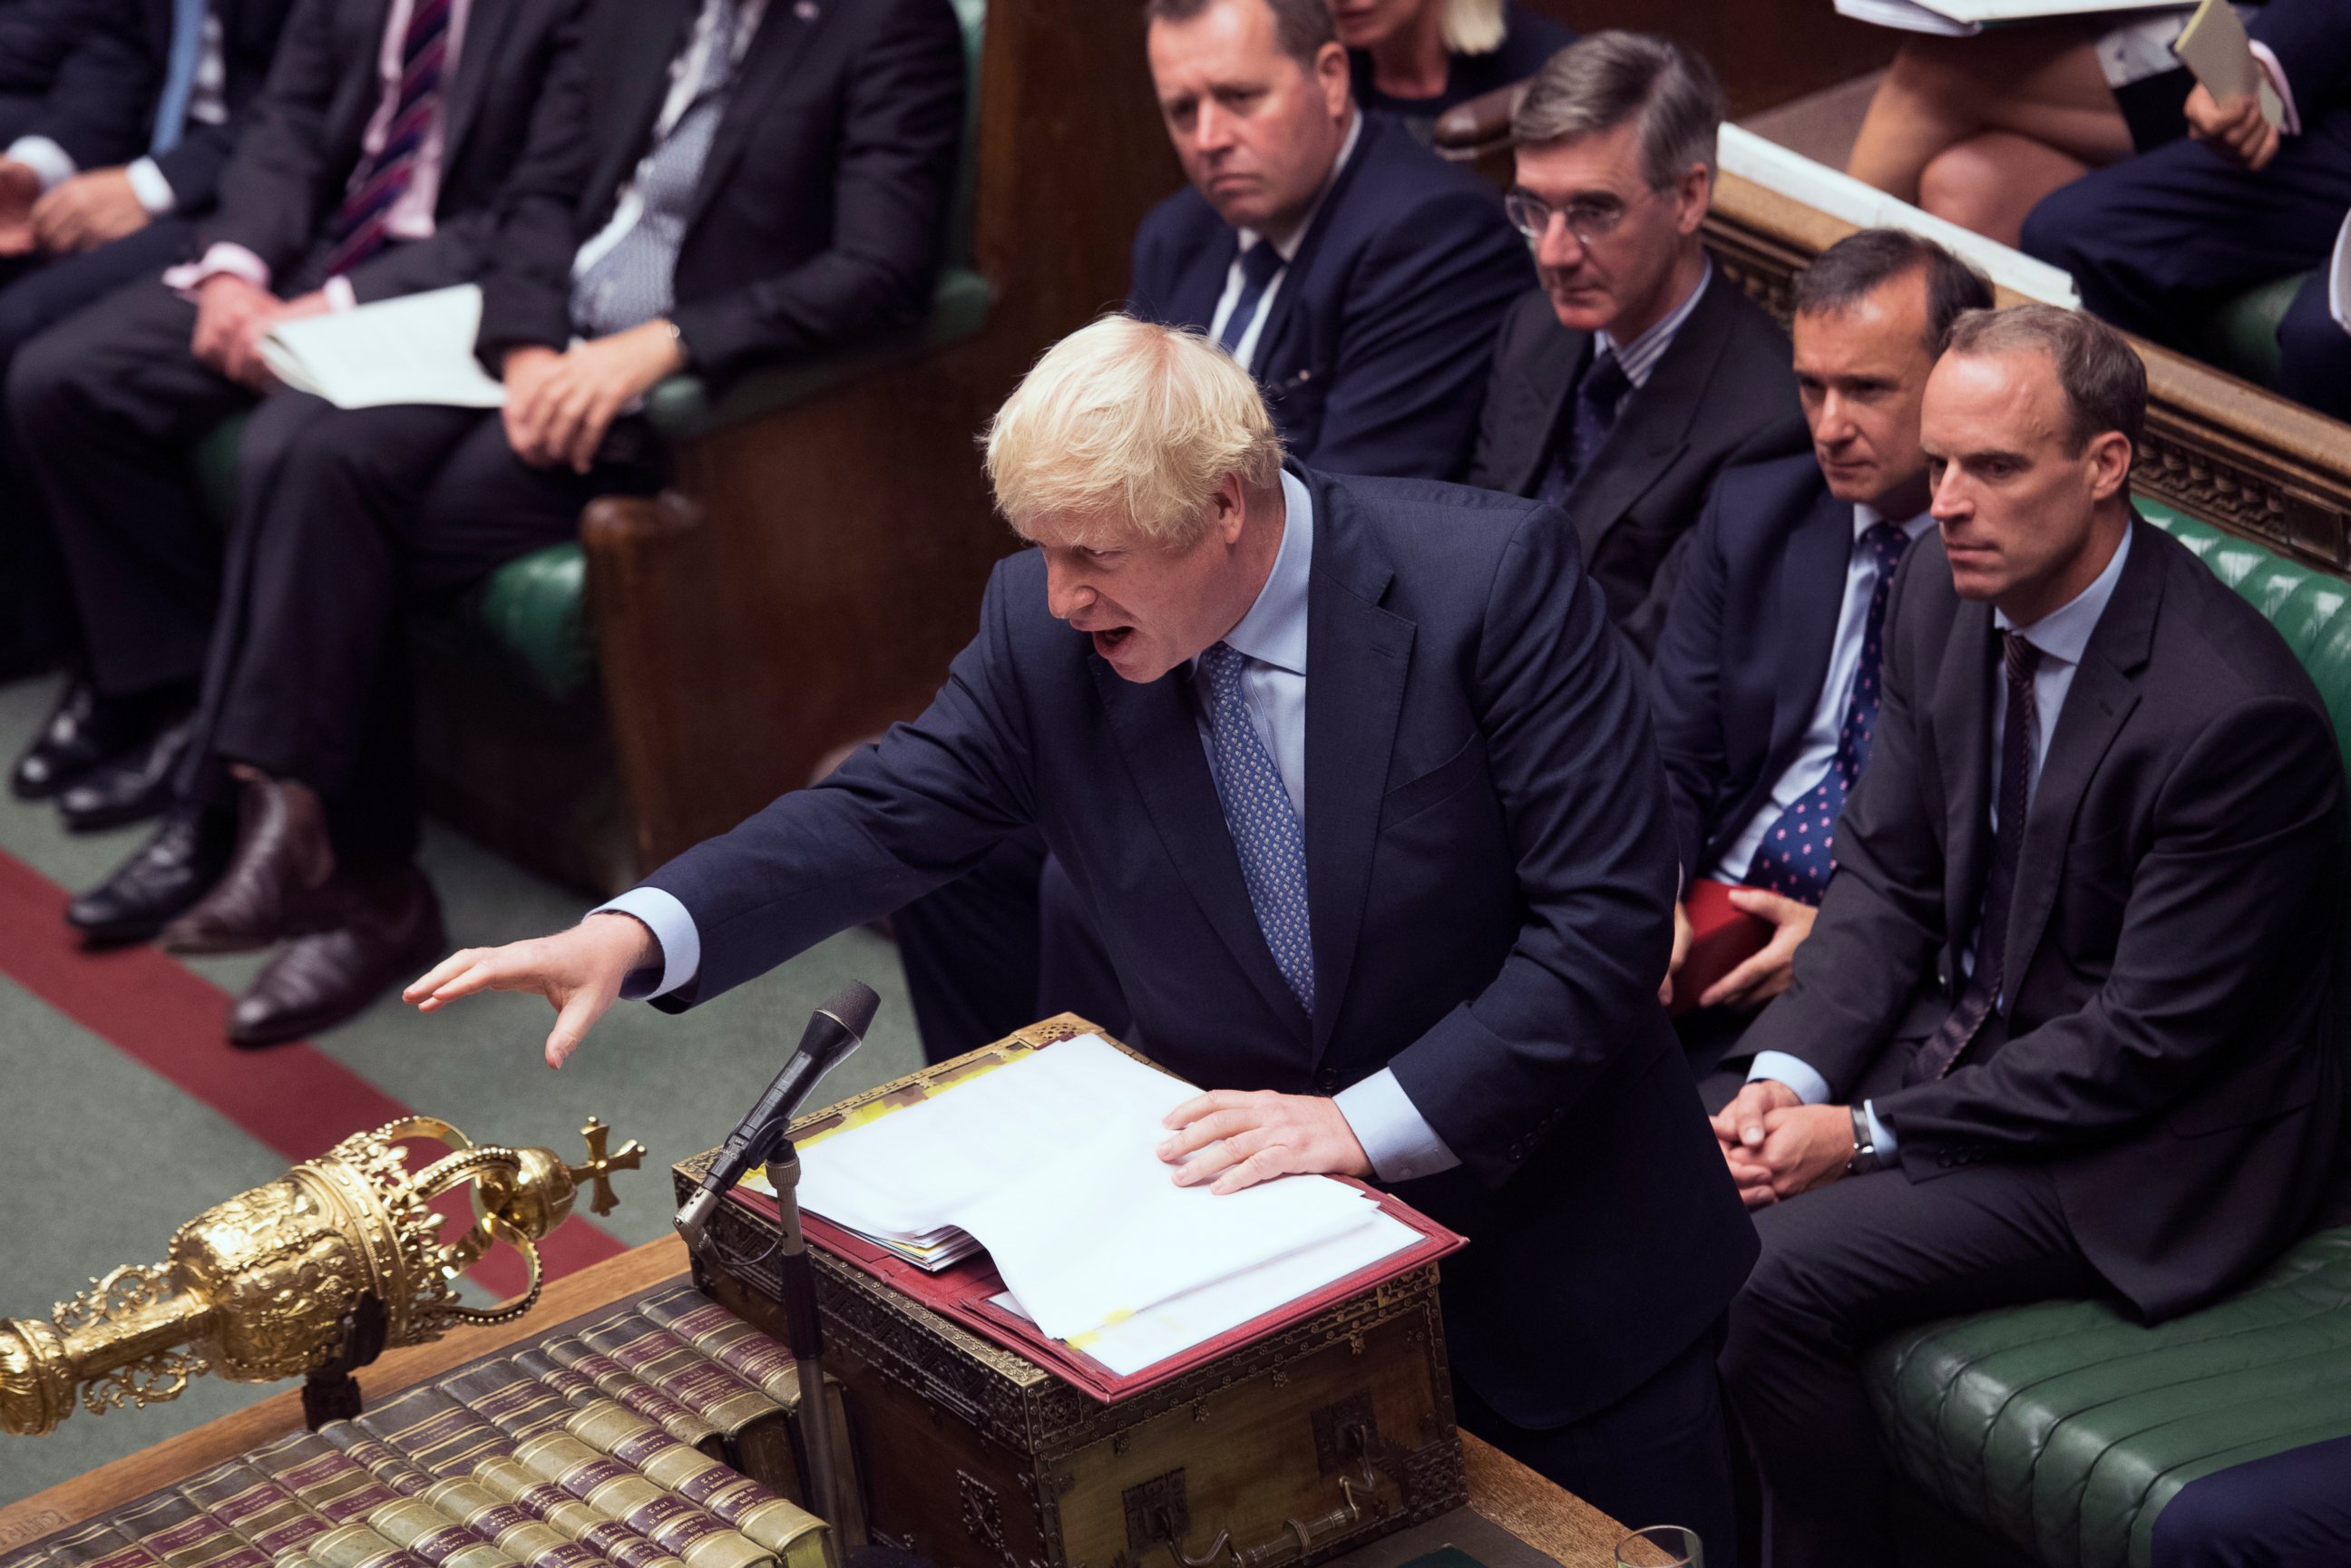 PHOTO: In this handout photo provided by the House of Commons, Britain's Prime Minister Boris Johnson gestures during his first Prime Minister's Questions, in the House of Commons in London, Wednesday, Sept. 4, 2019.